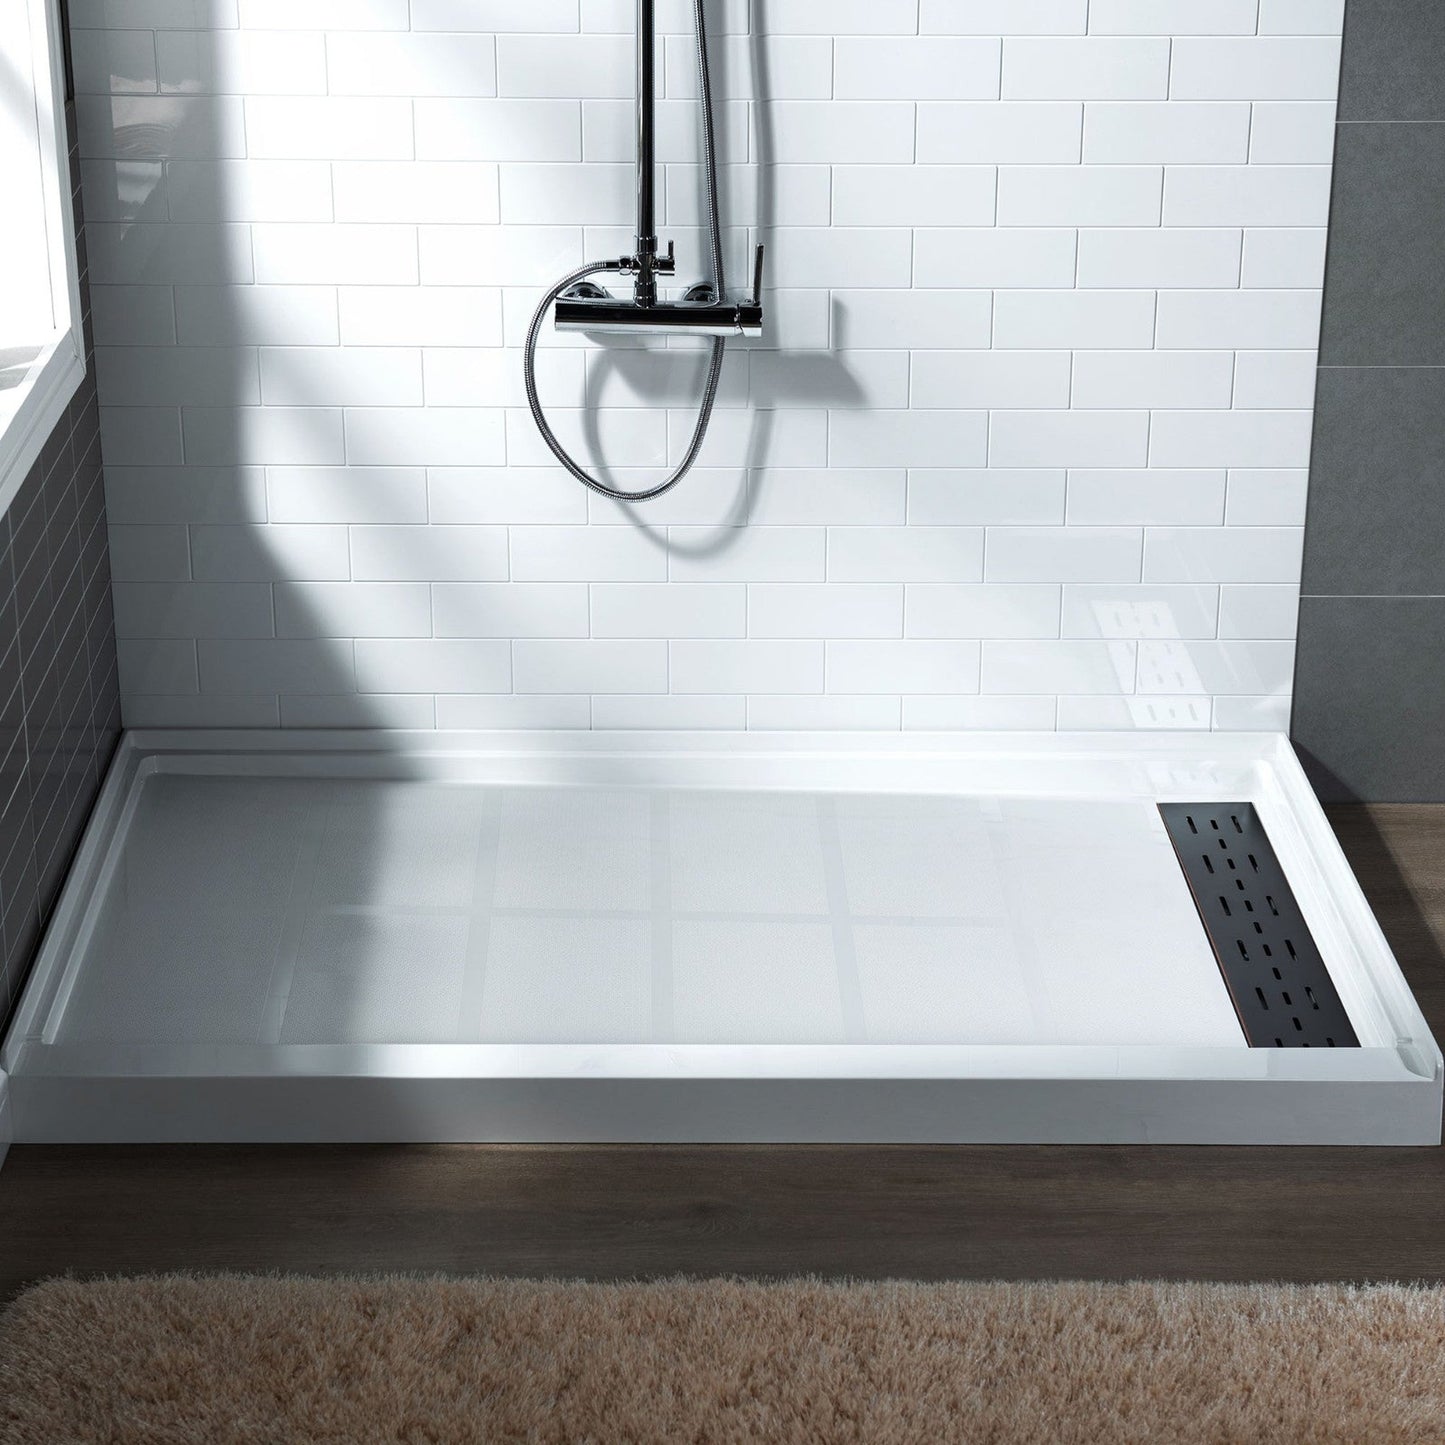 WoodBridge 48" x 36" White Solid Surface Shower Base Right Drain Location With Oil Rubbed Bronze Trench Drain Cover